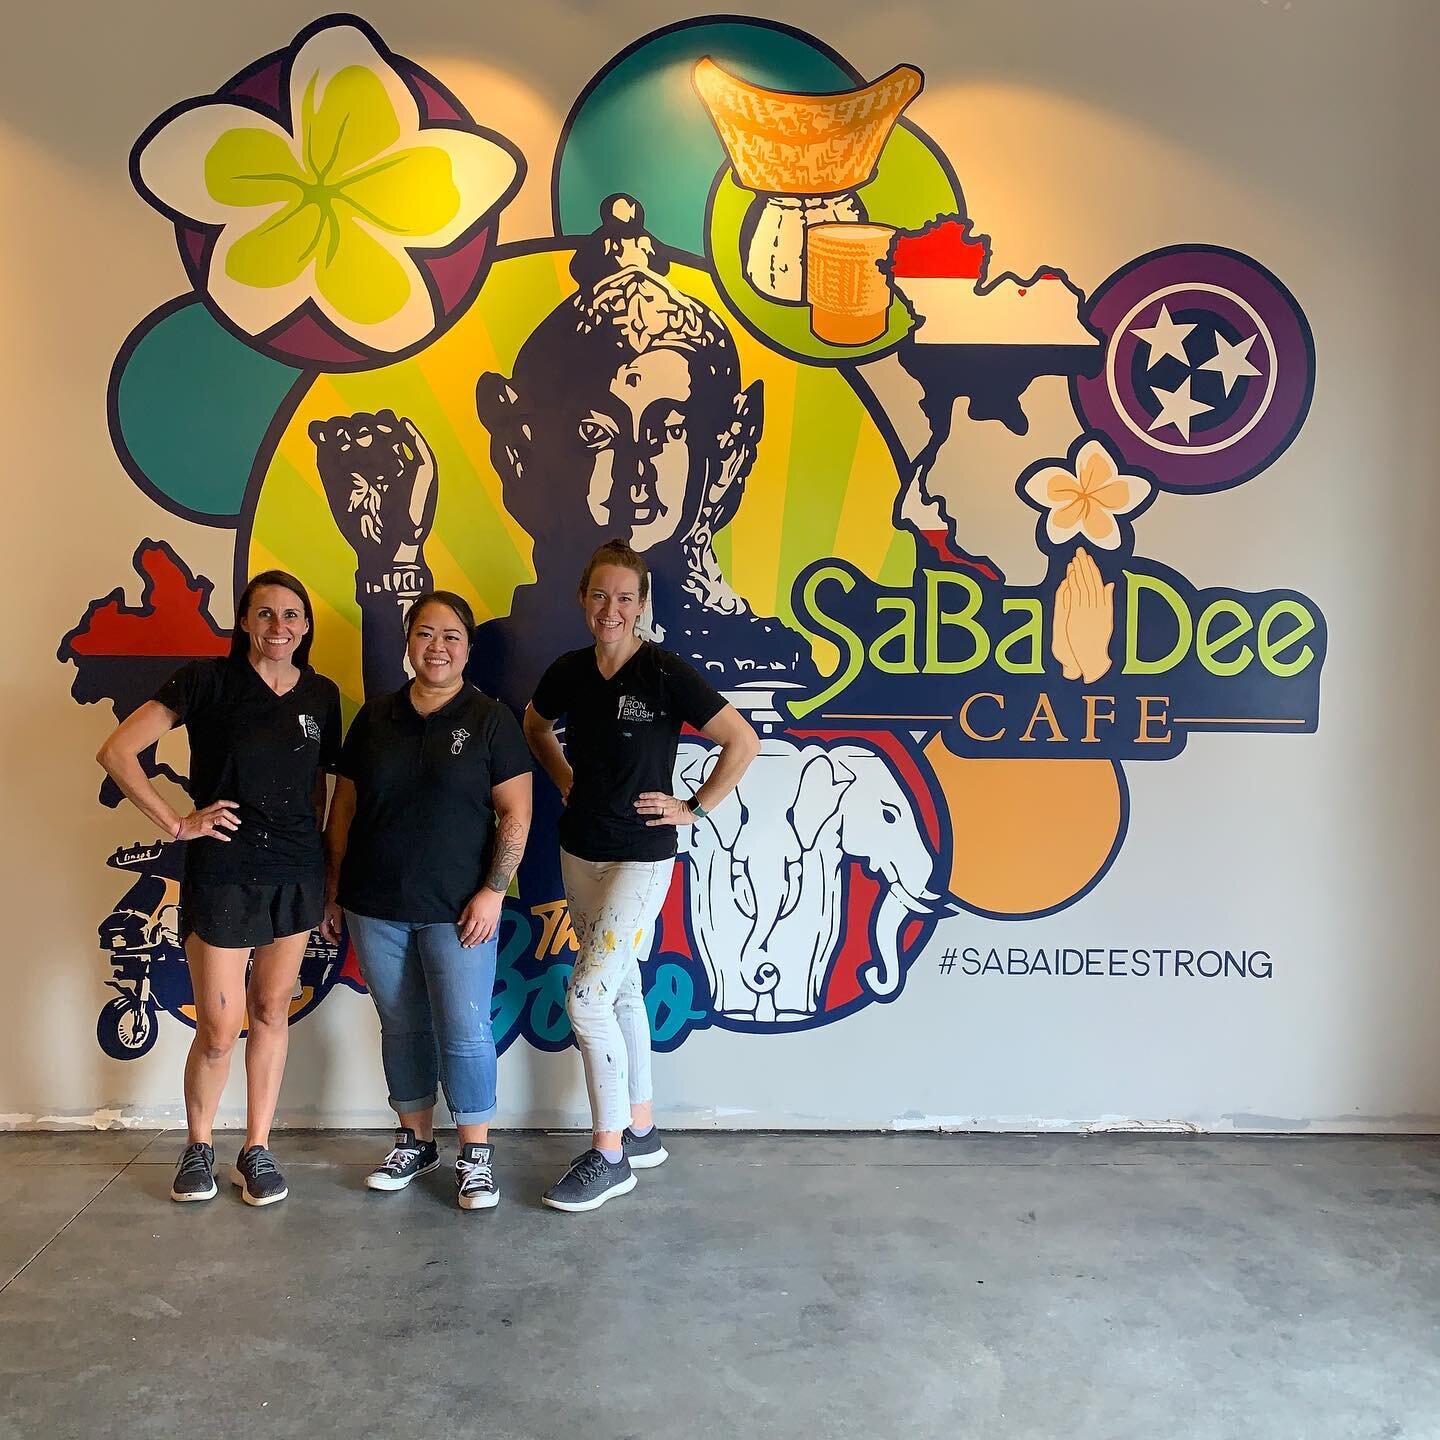 This mural was all about the details! We are delighted that we got to play a part in the renovations and redesign @sabaideeboro (And having amazing Thai food while we painted was a definite bonus!)
The design is a celebration of Thailand, Laos and M&